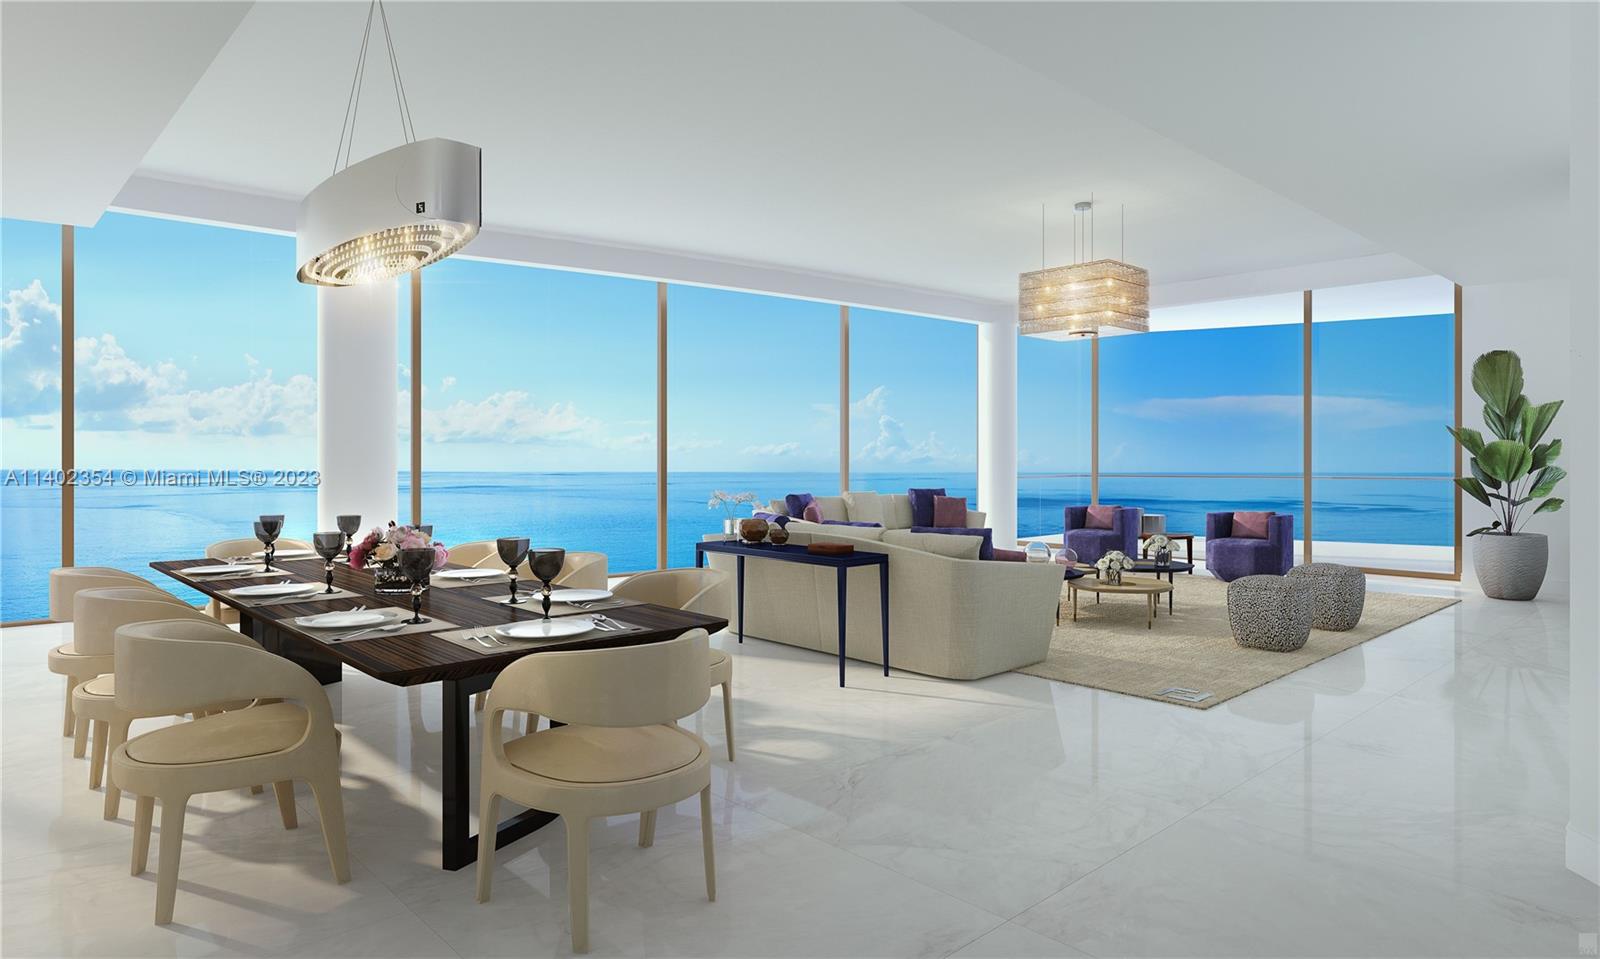 This is a spectacular 4 bedroom Ravello Model located on the North Corner of the Brand New Estates at Acqualina Boutique Tower. Beautiful open layout with state of the art kitchen and top of the line finishes. It's one of the few residences that surpasses the building next door therefore you will have unblocked views. This unit will be delivered furnished by Luxury Living and with motorized shades throughout. This is Five Star Five Diamond Lifestyle with award winning services and Amenities. A house car, Rolls Royce with a driver, Beach Club, Concierge, Security, Doorman, Ice Skating, Bowling and Restaurants including Avra, IL Mulino, Costa Grill and Ke-Uh. Pictures are renderings not actual photographs.